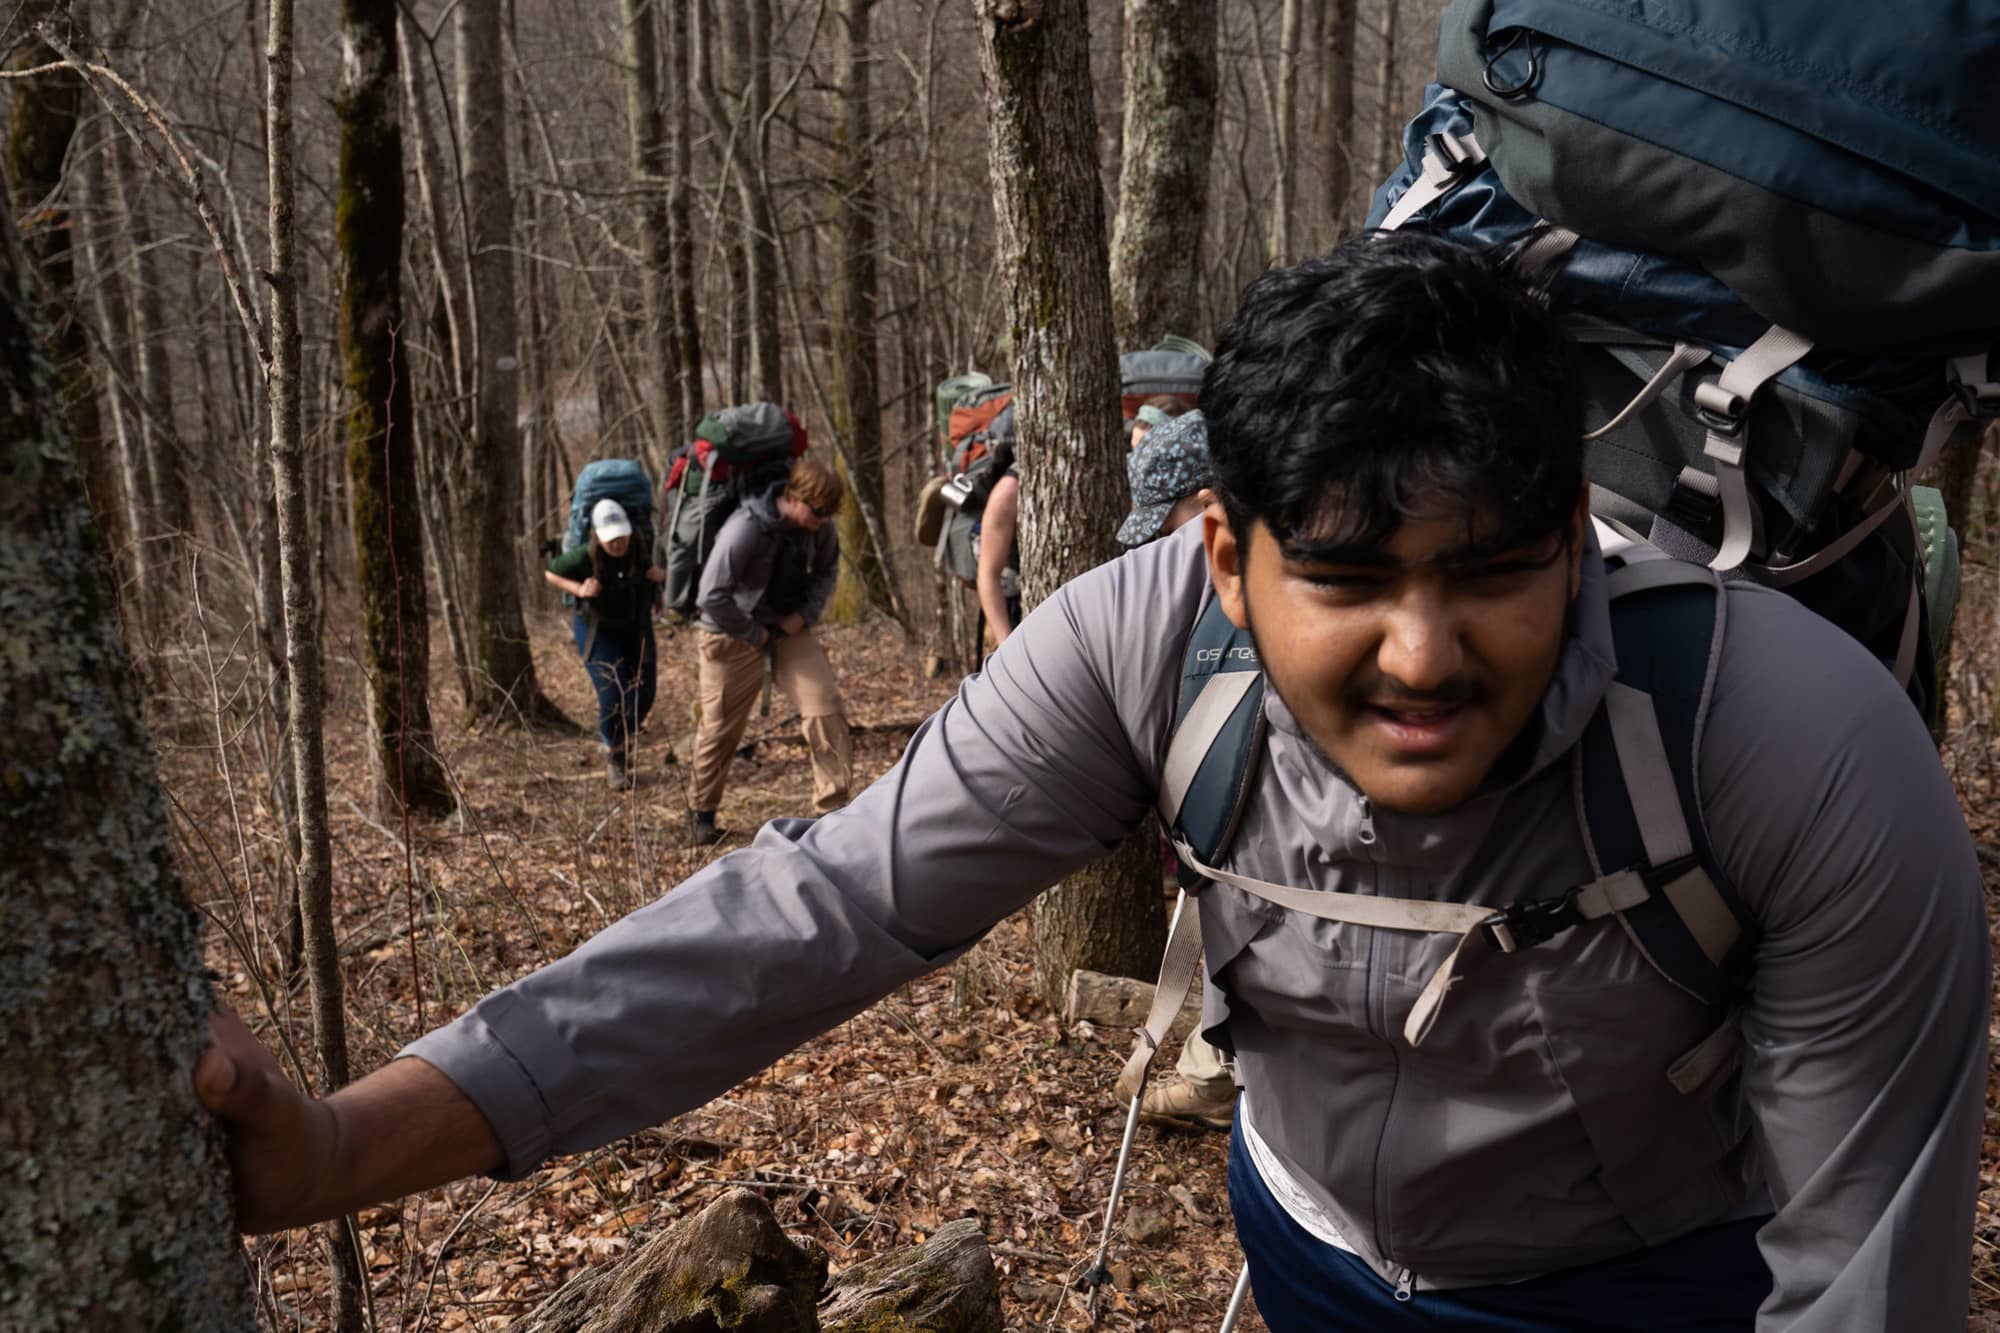 Vishnu Palanki rests his hand on a tree during his fourth day backpacking a section of the Appalachian Trail in the Nantahala National Forest on Tuesday, March 8, 2022, near Franklin, North Carolina.